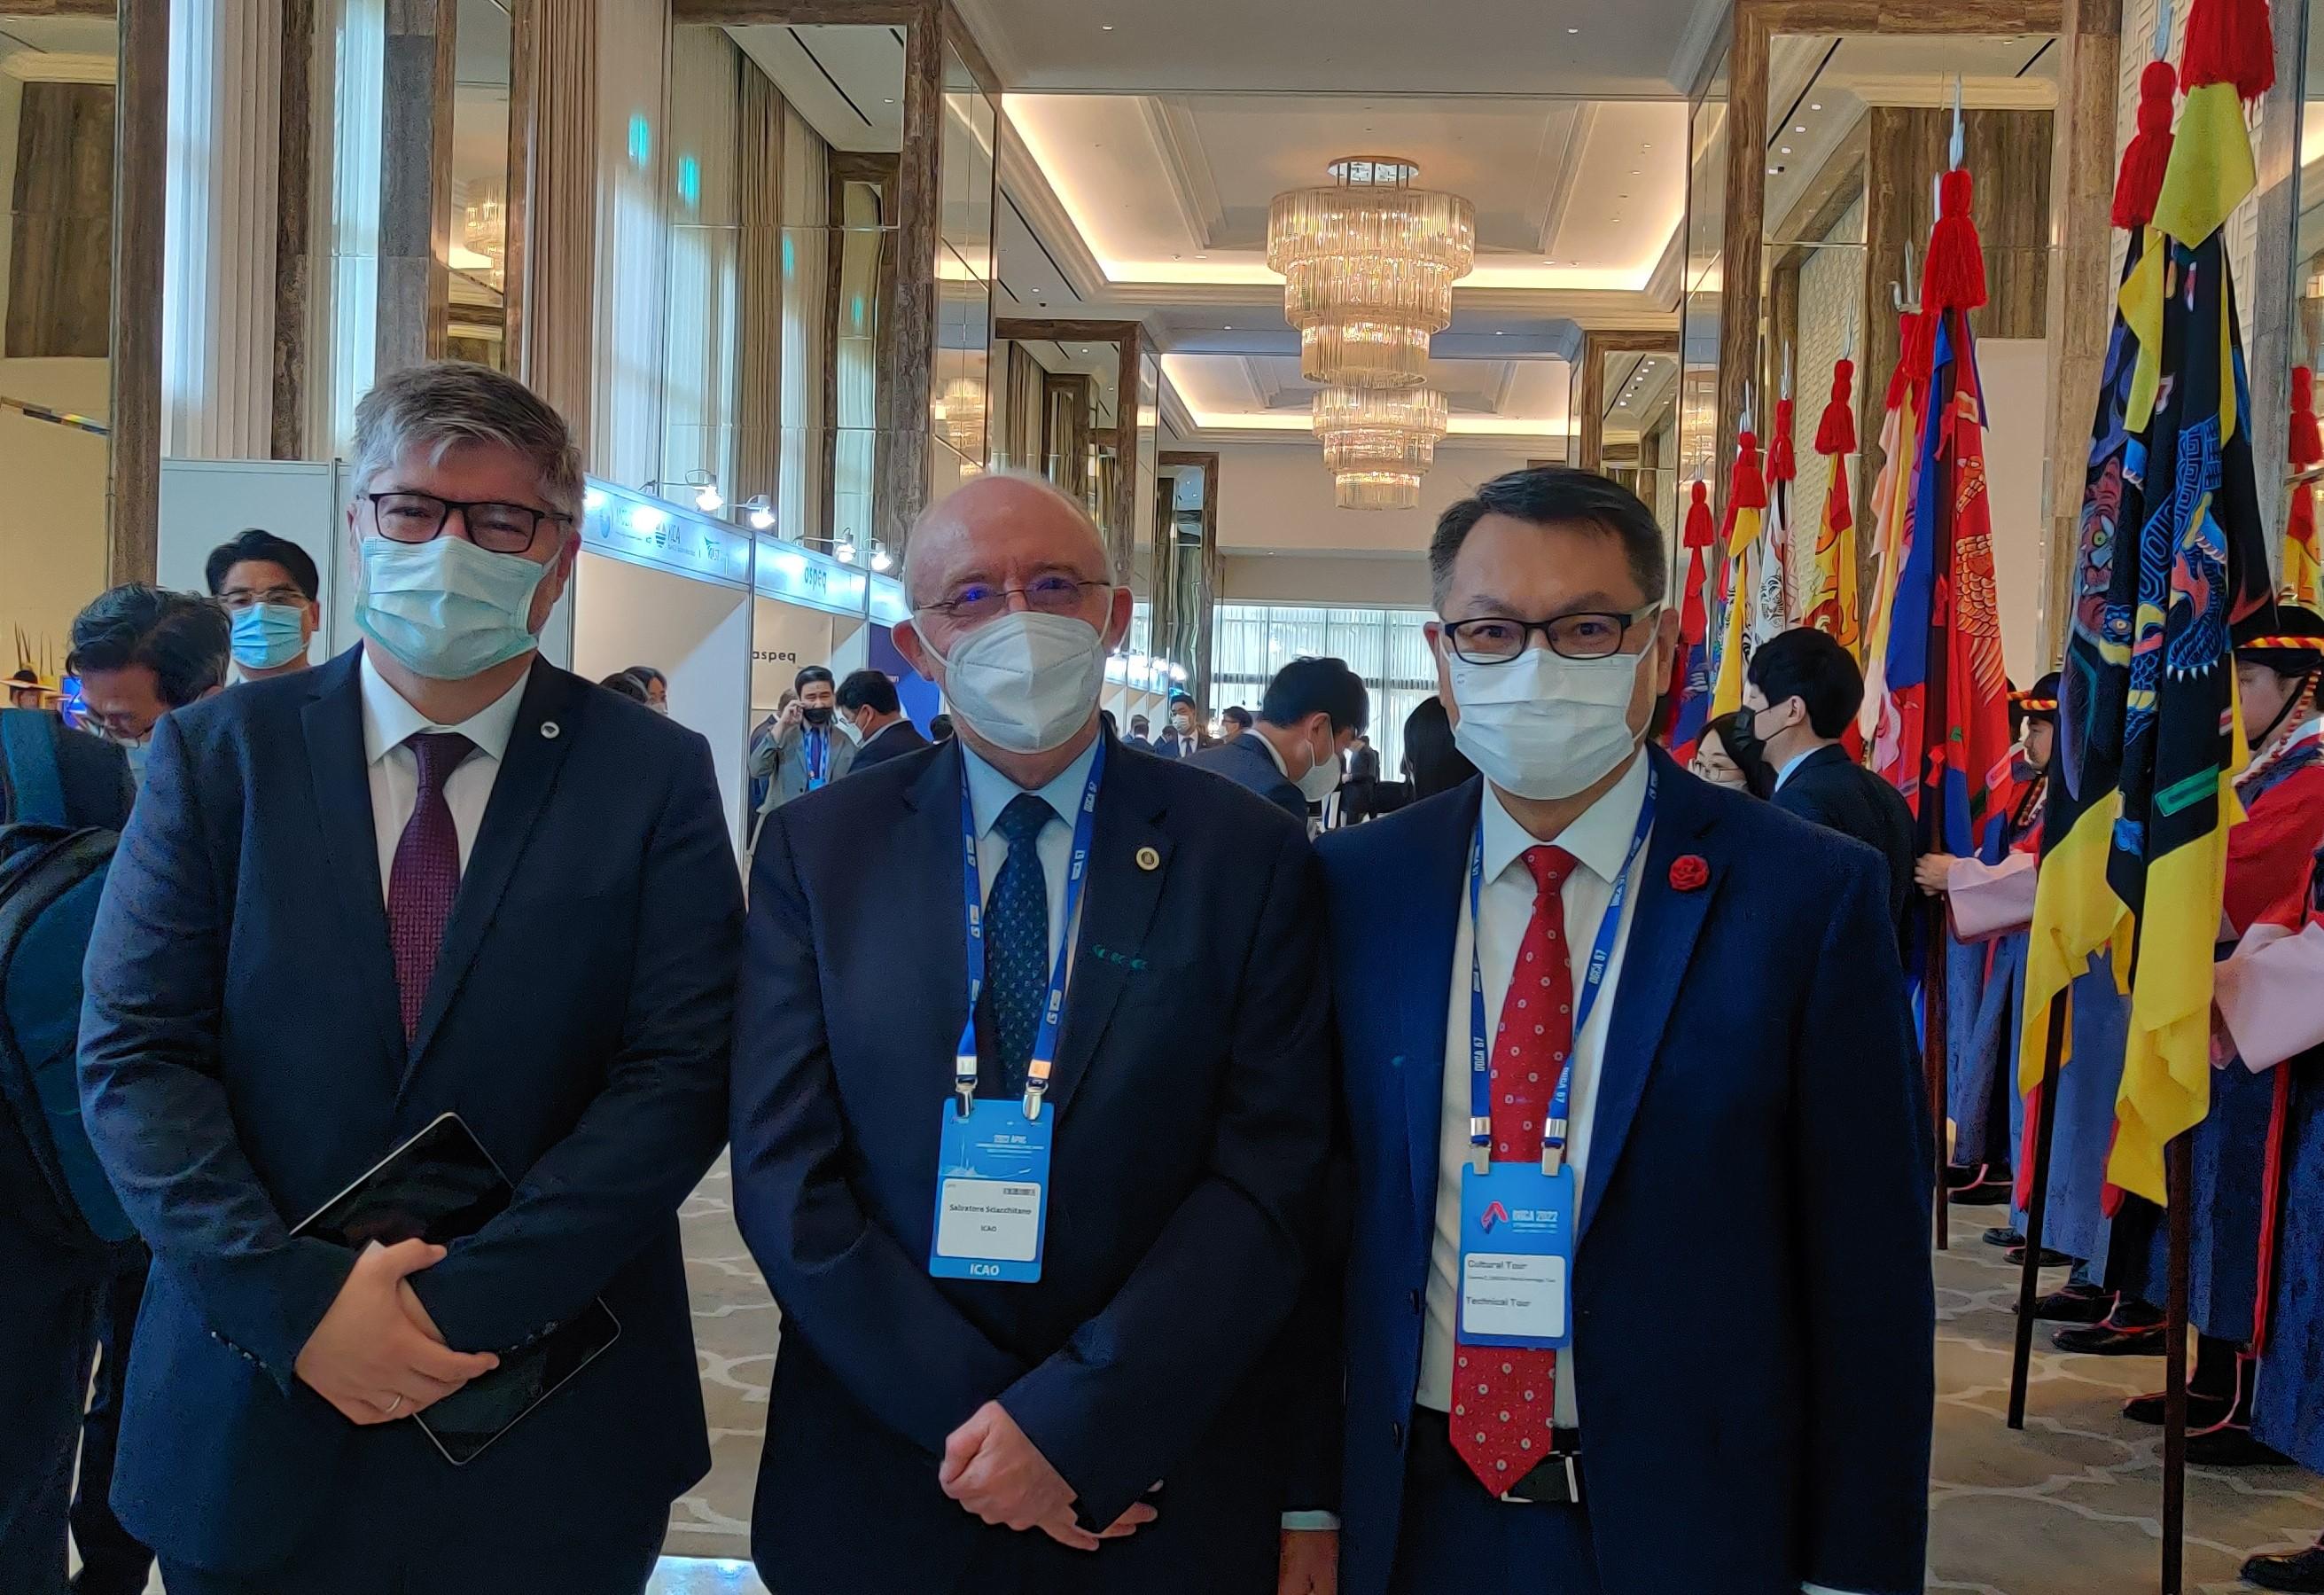 The Director-General of Civil Aviation, Mr Victor Liu (right), is pictured with the President of the International Civil Aviation Organization (ICAO) Council, Mr Salvatore Sciacchitano (centre), and the Secretary General of the ICAO, Mr Juan Carlos Salazar (left), during the 57th Conference of Directors General of Civil Aviation, Asia and Pacific Regions, held in Incheon, Korea, from July 4 to 8.